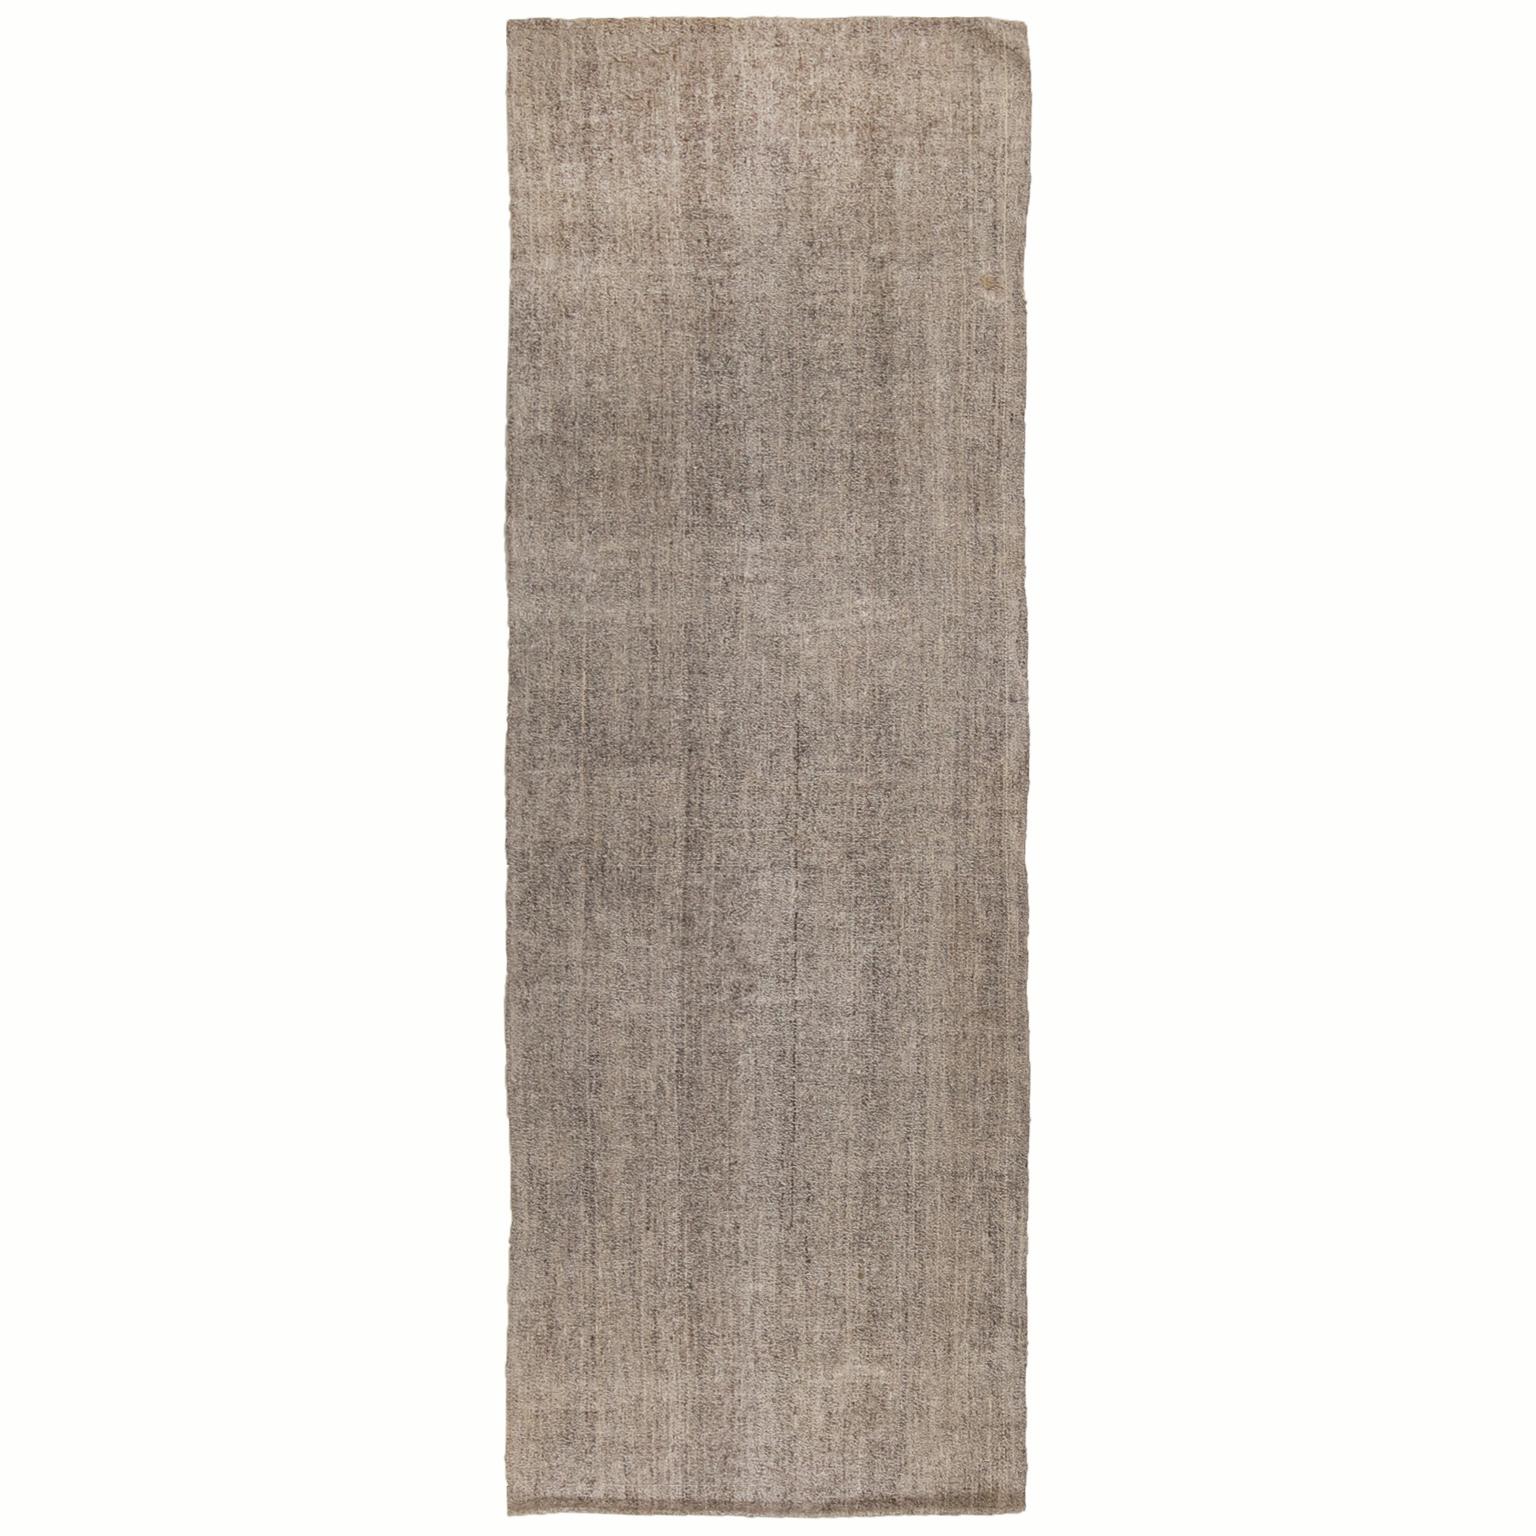 Originating from Turkey in 1960, this vintage wool Kilim runner is flat-woven in high quality wool with subtly rectilinear, vertically oriented abrash of Industrial and metallic gray and silver colorways.
   